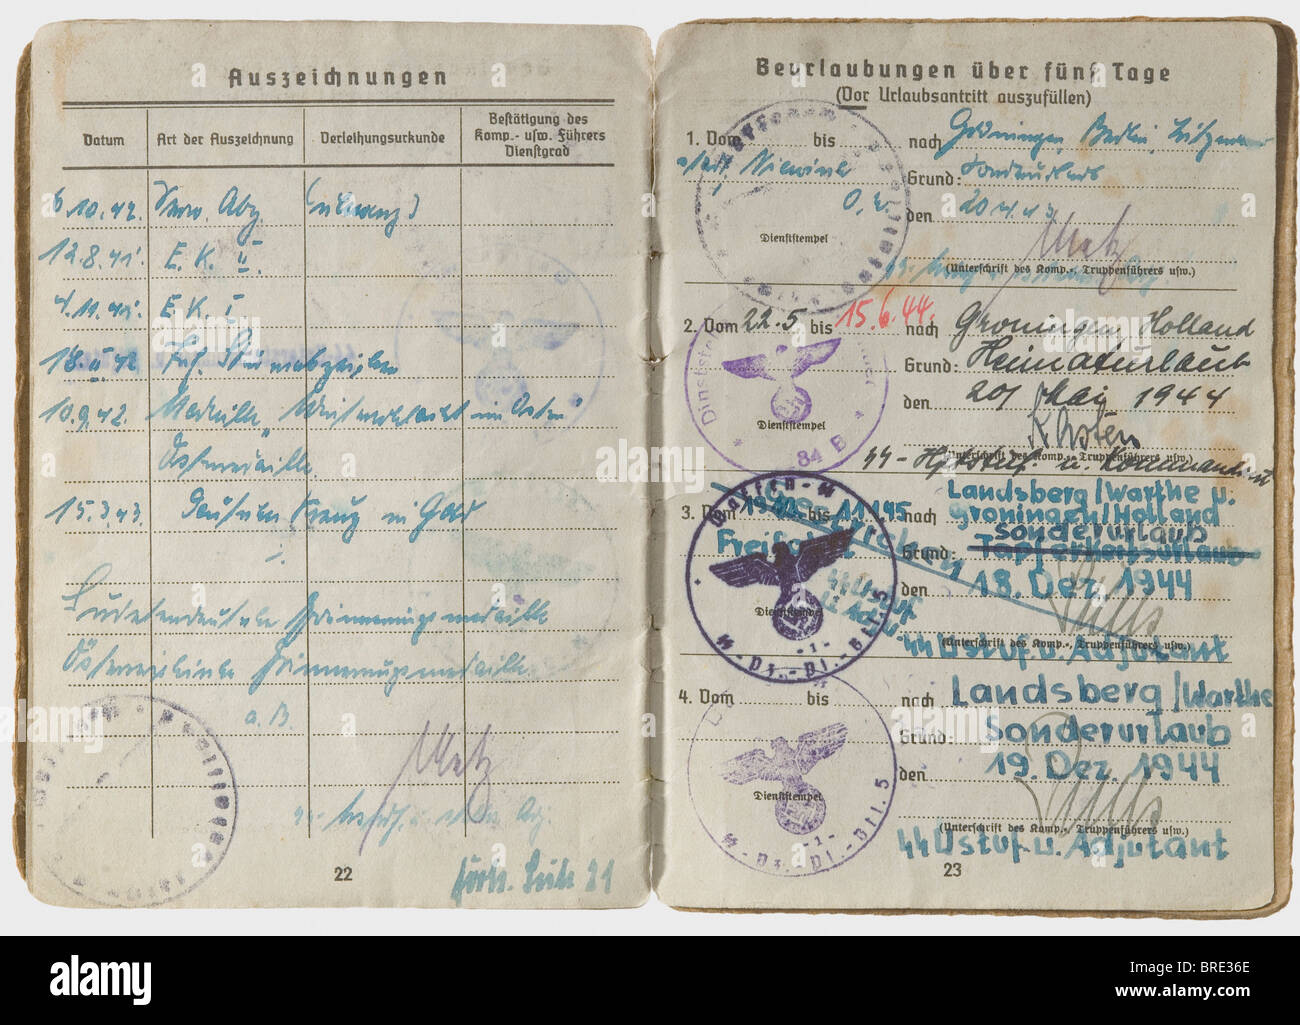 Knight's Cross Winner SS-Sturmbannführer Eberhard Heder, his Soldbuch and driver's license The Identity/Pay Book (Army Type) issued 15 June 1943 by SS-Pioneer Battalion 5 of SS-Panzer Division 'Wiking' and signed in places by Hugo Eichhorn. Many entries, among which are awards of the Iron Cross 1st and 2nd Class, the Infantry Assault Badge, the German Cross in Gold on 15 March 1944 (as commander of the 'Narva' Battalion of Estonian volunteers), the Knight's Cross of the Iron Cross on 23 November 1944 (as commander of Pioneer Battalion 5 of 'Wiking' Division for, Stock Photo